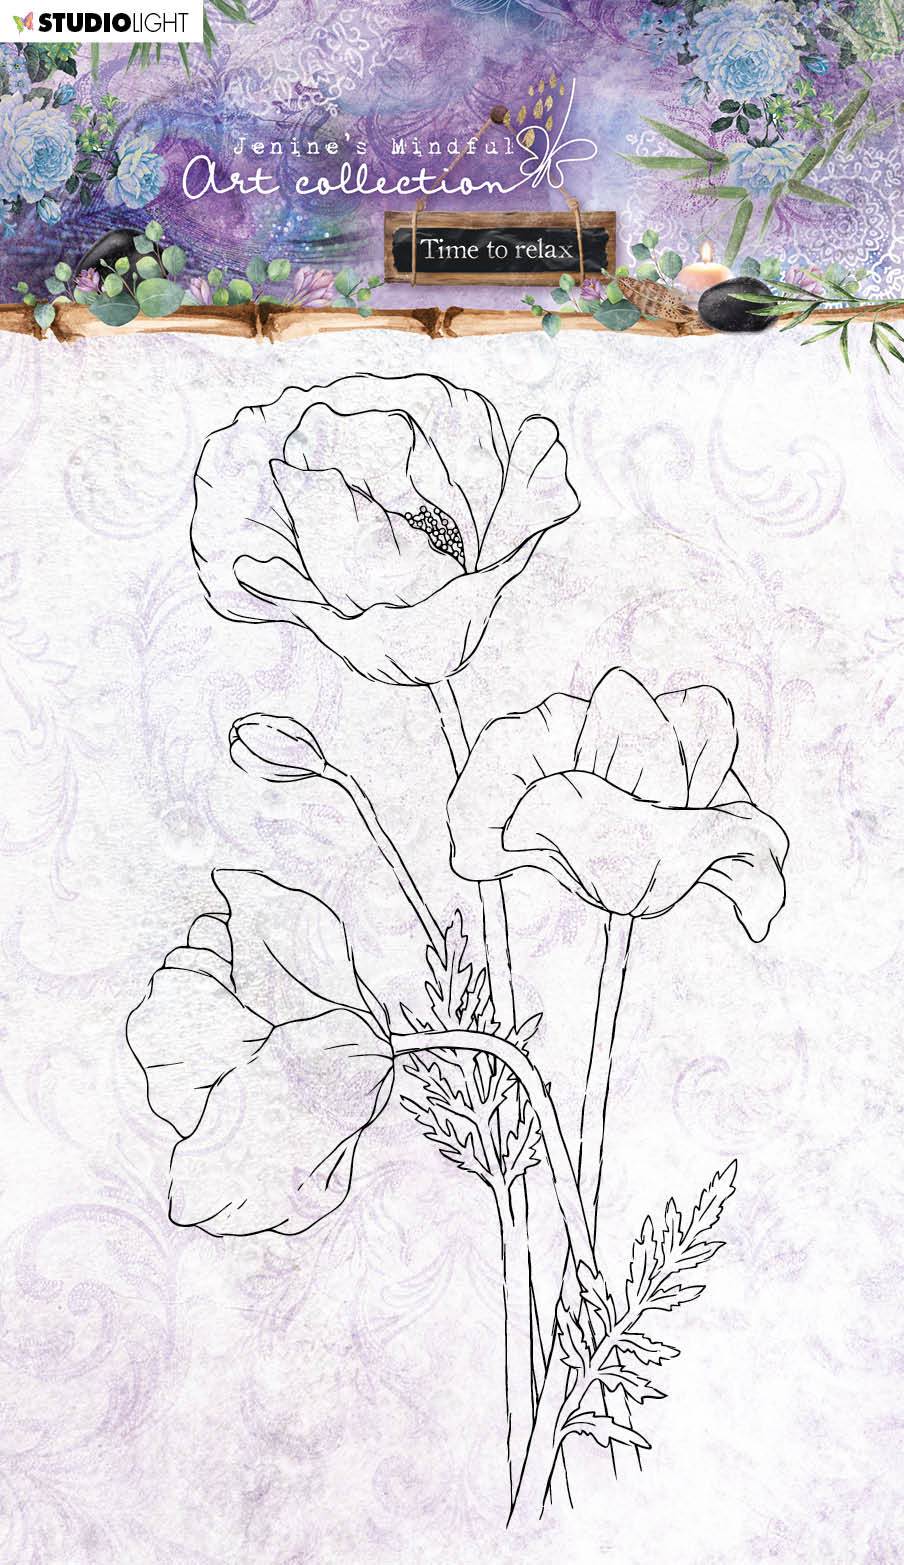 Jenine's Mindful Art Clear Stamp Poppy Time to Relax 2.0 148x210mm nr.23